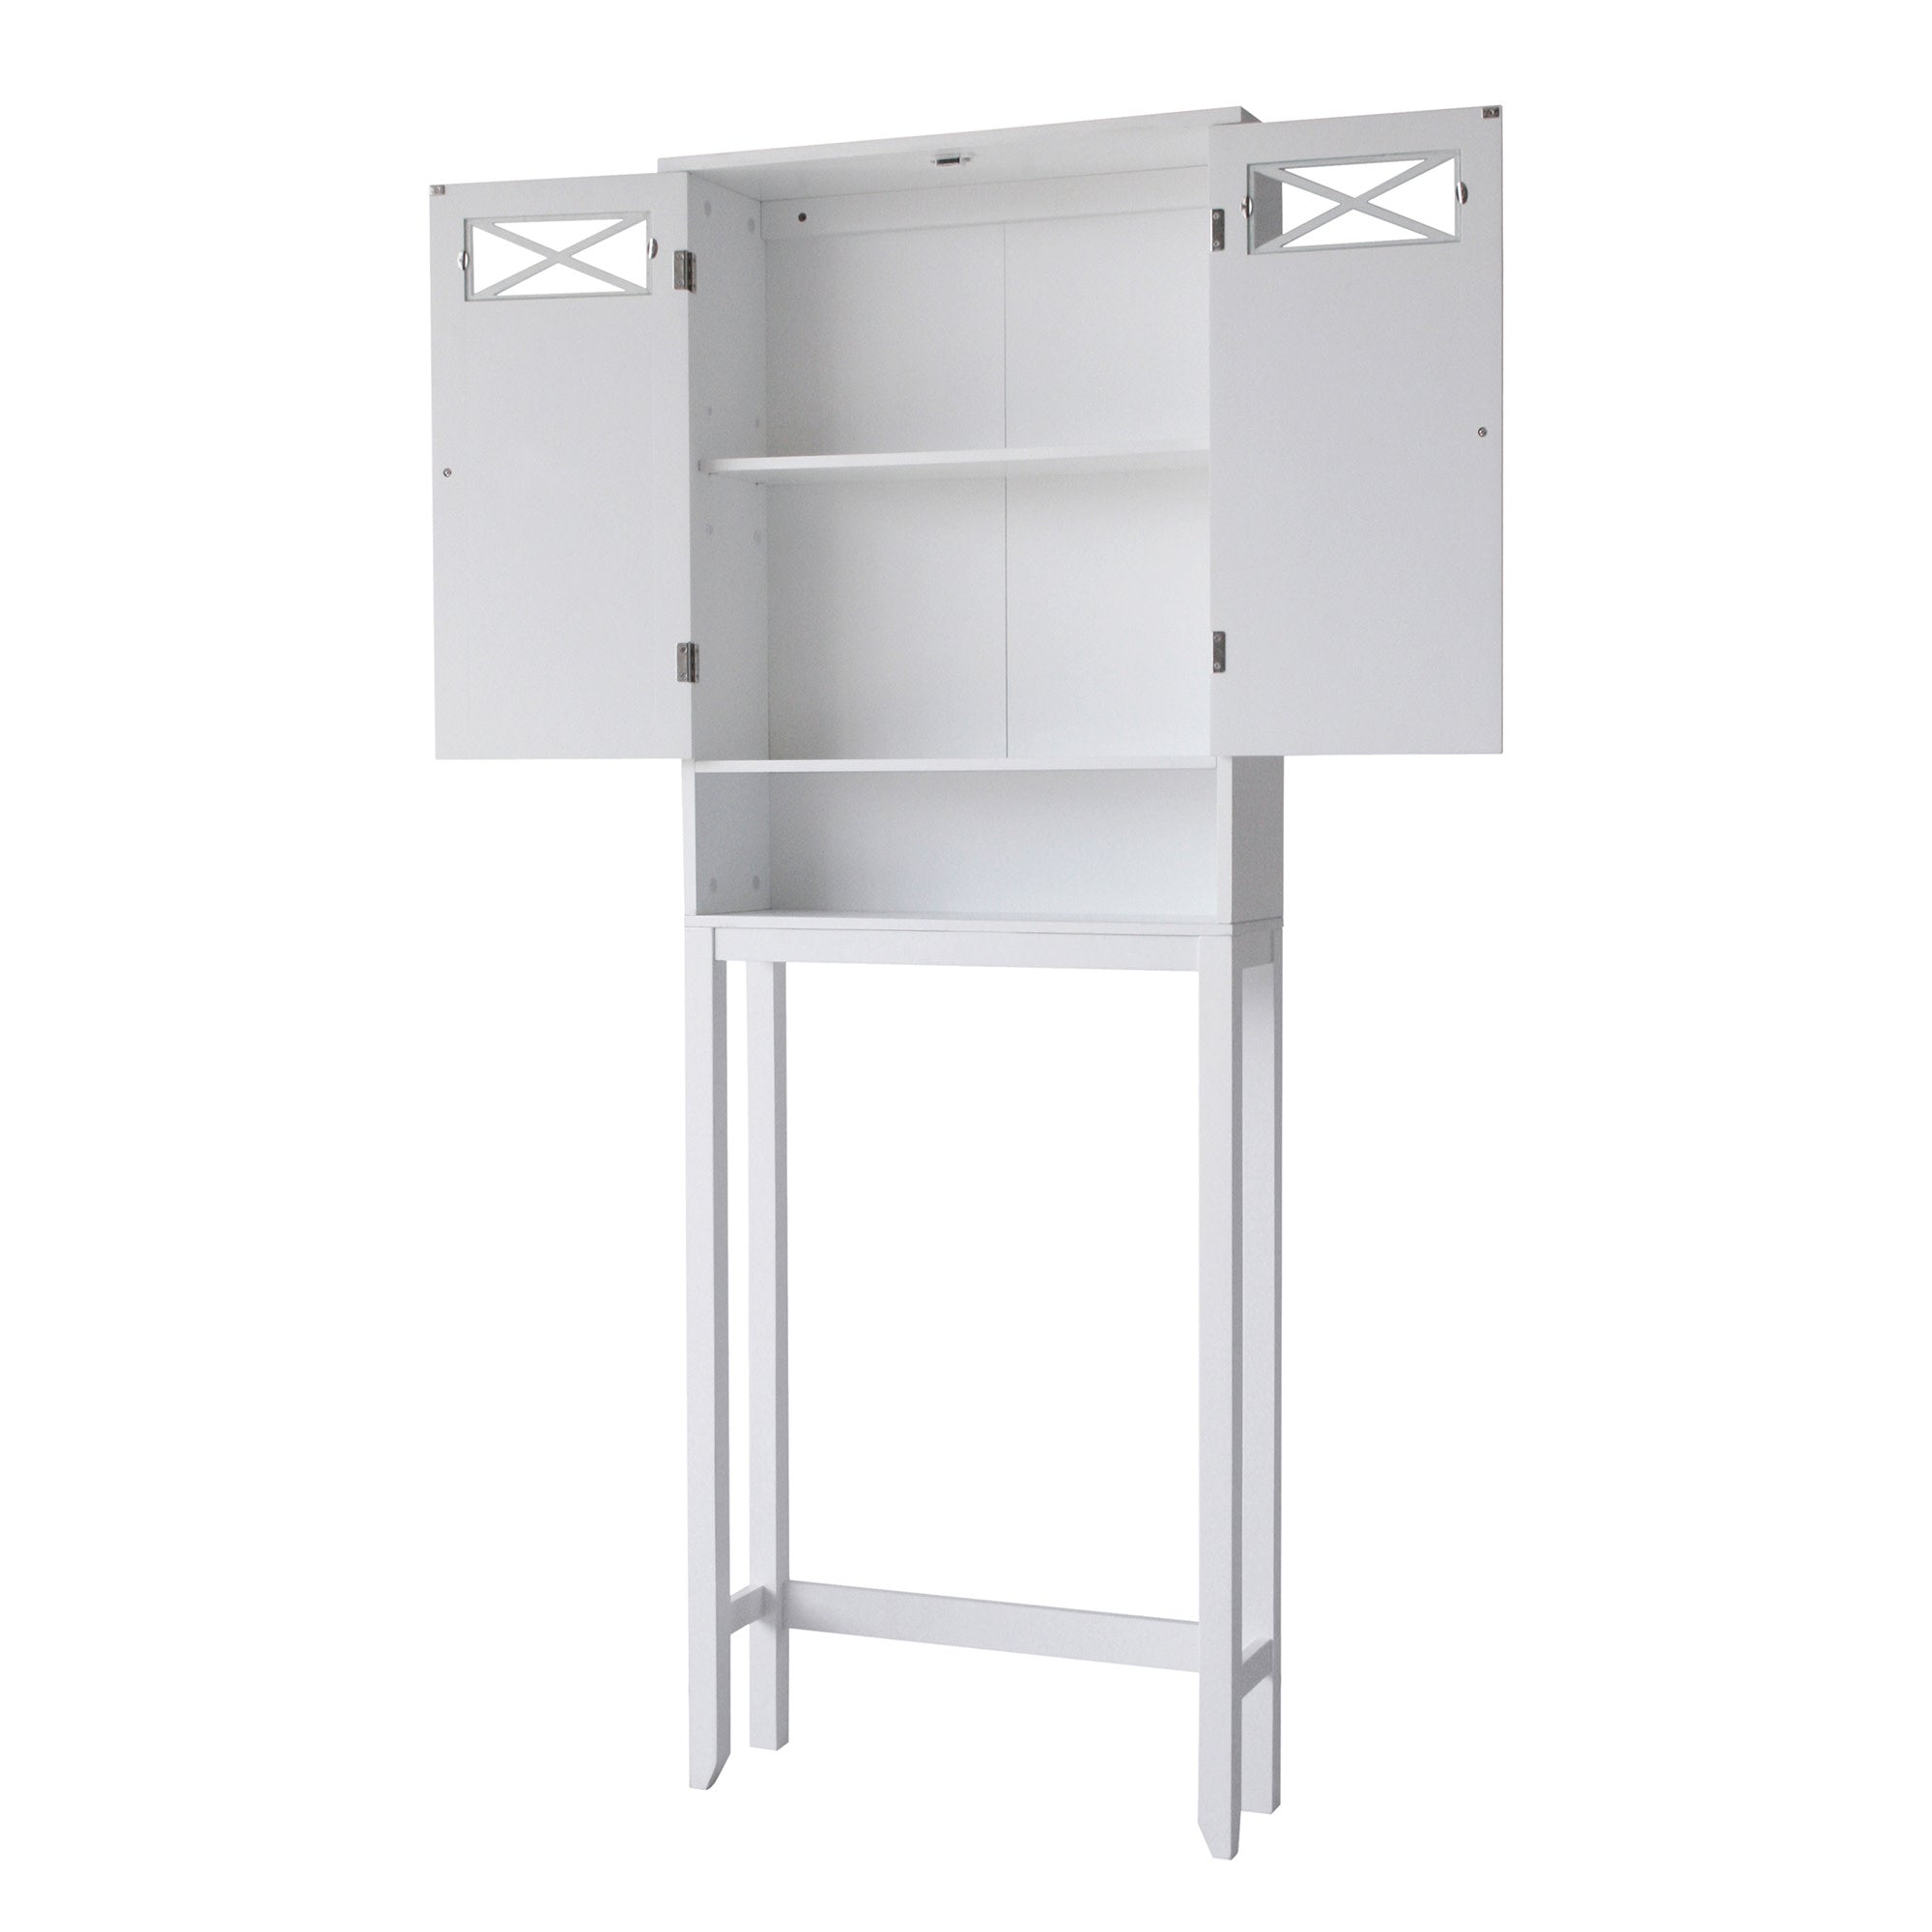 Teamson Home Dawson Over the Toilet Space Saver Bathroom Storage Cabinet with Adjustable Shelves